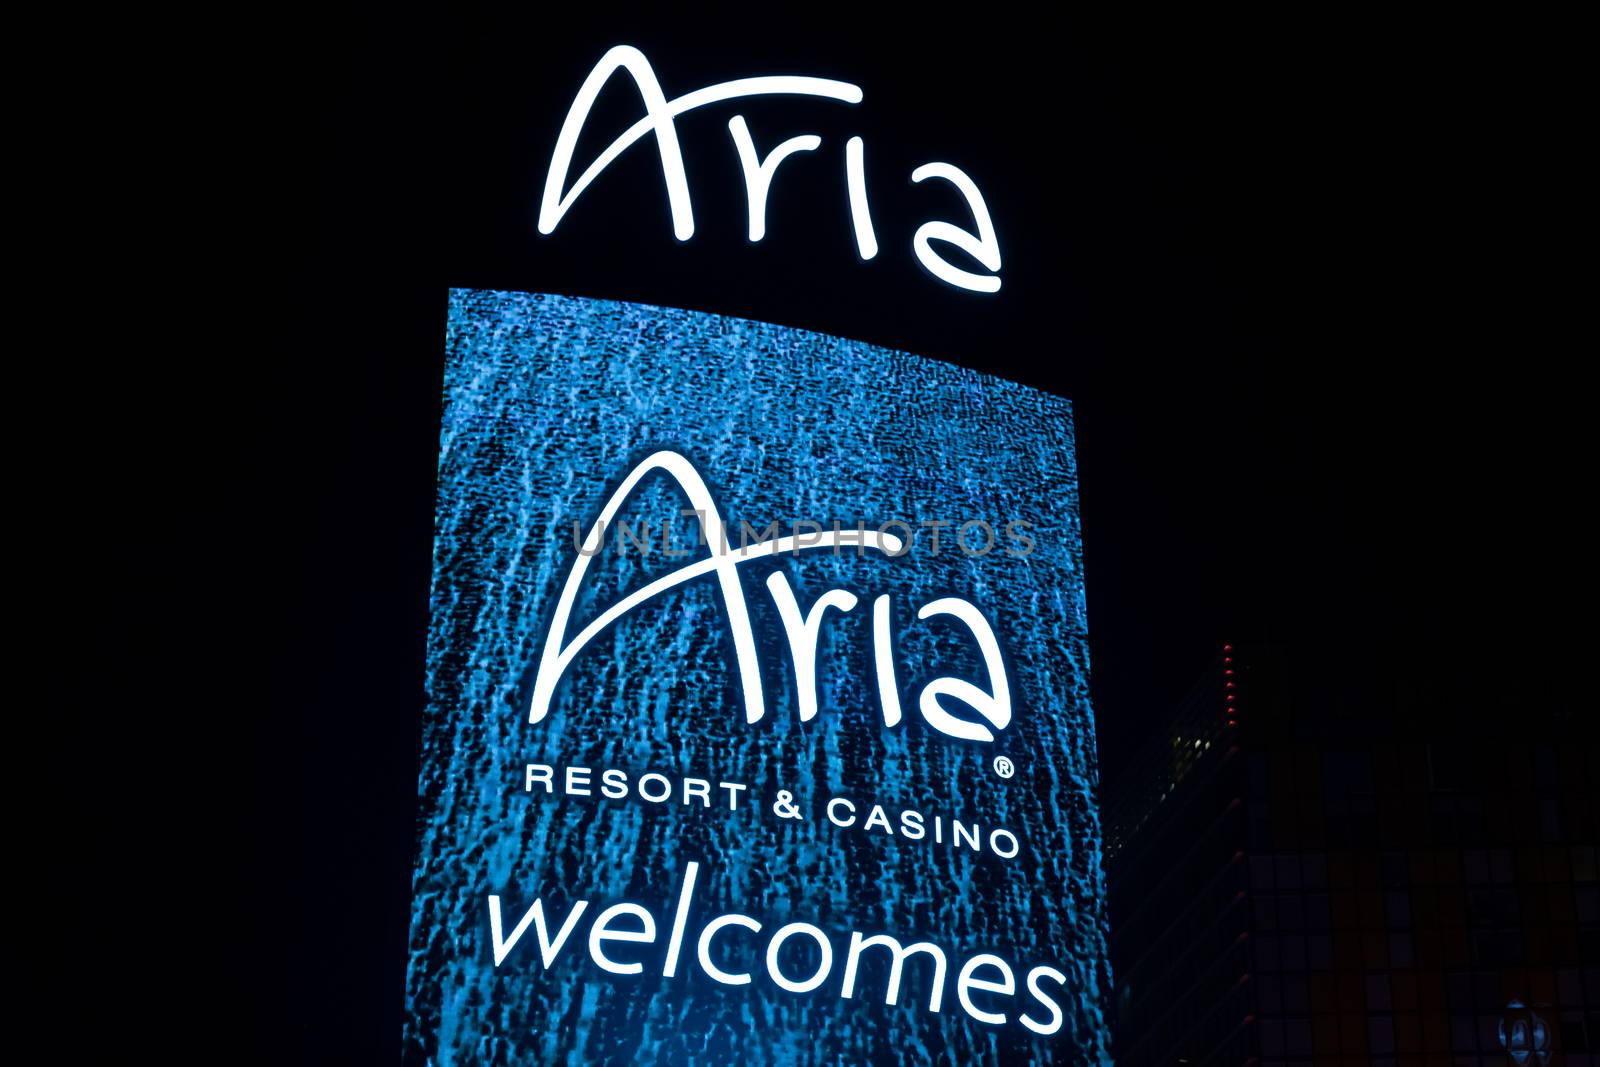 LAS VEGAS, NV/USA - FEBRUARY 14, 2016: The Aria hotel and casino exterior sign at night. Aria Resort and Casino is a luxury resort and casino on the Las Vegas Strip.